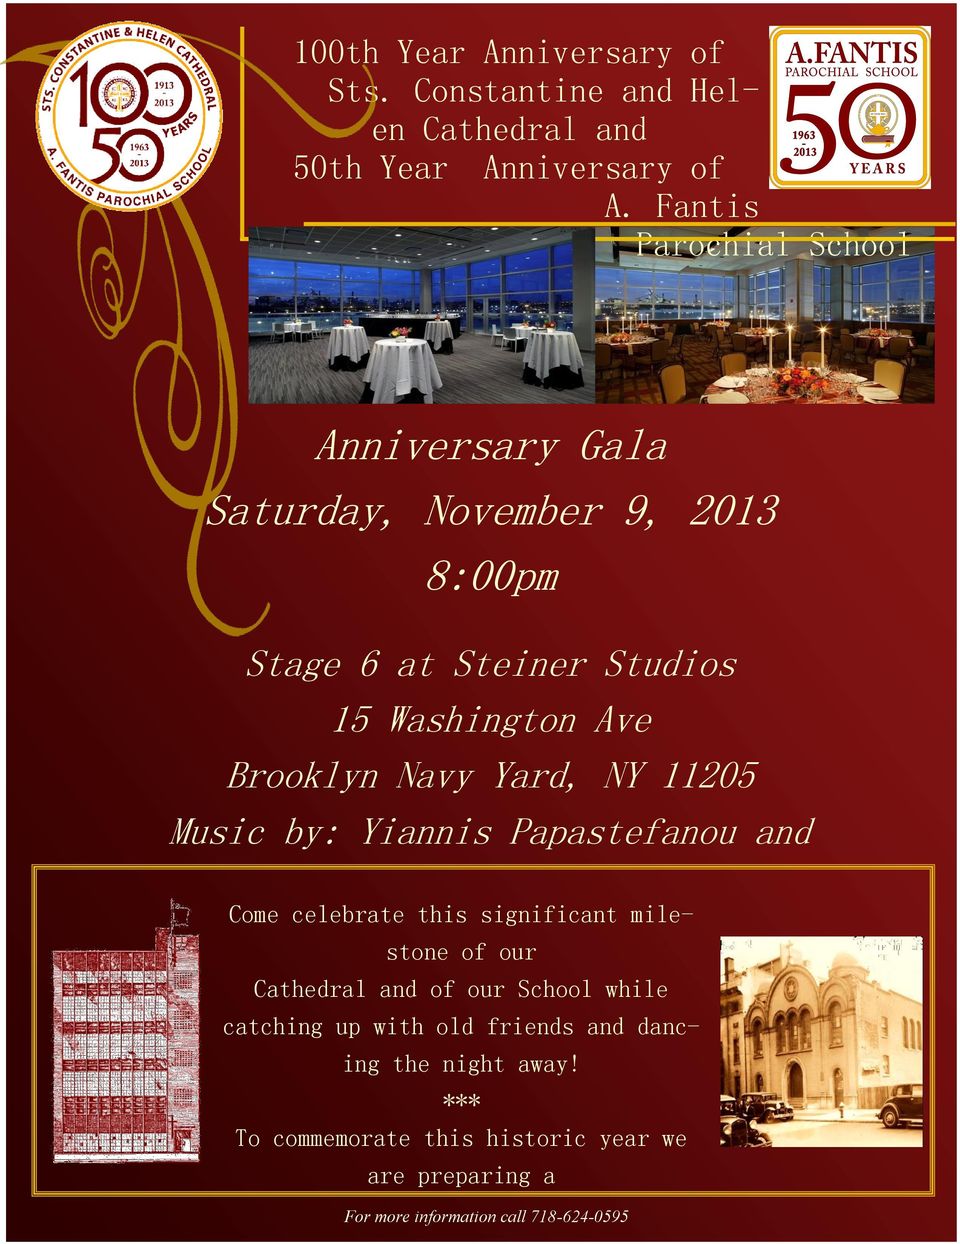 Navy Yard, NY 11205 Music by: Yiannis Papastefanou and Come celebrate this significant milestone of our Cathedral and of our